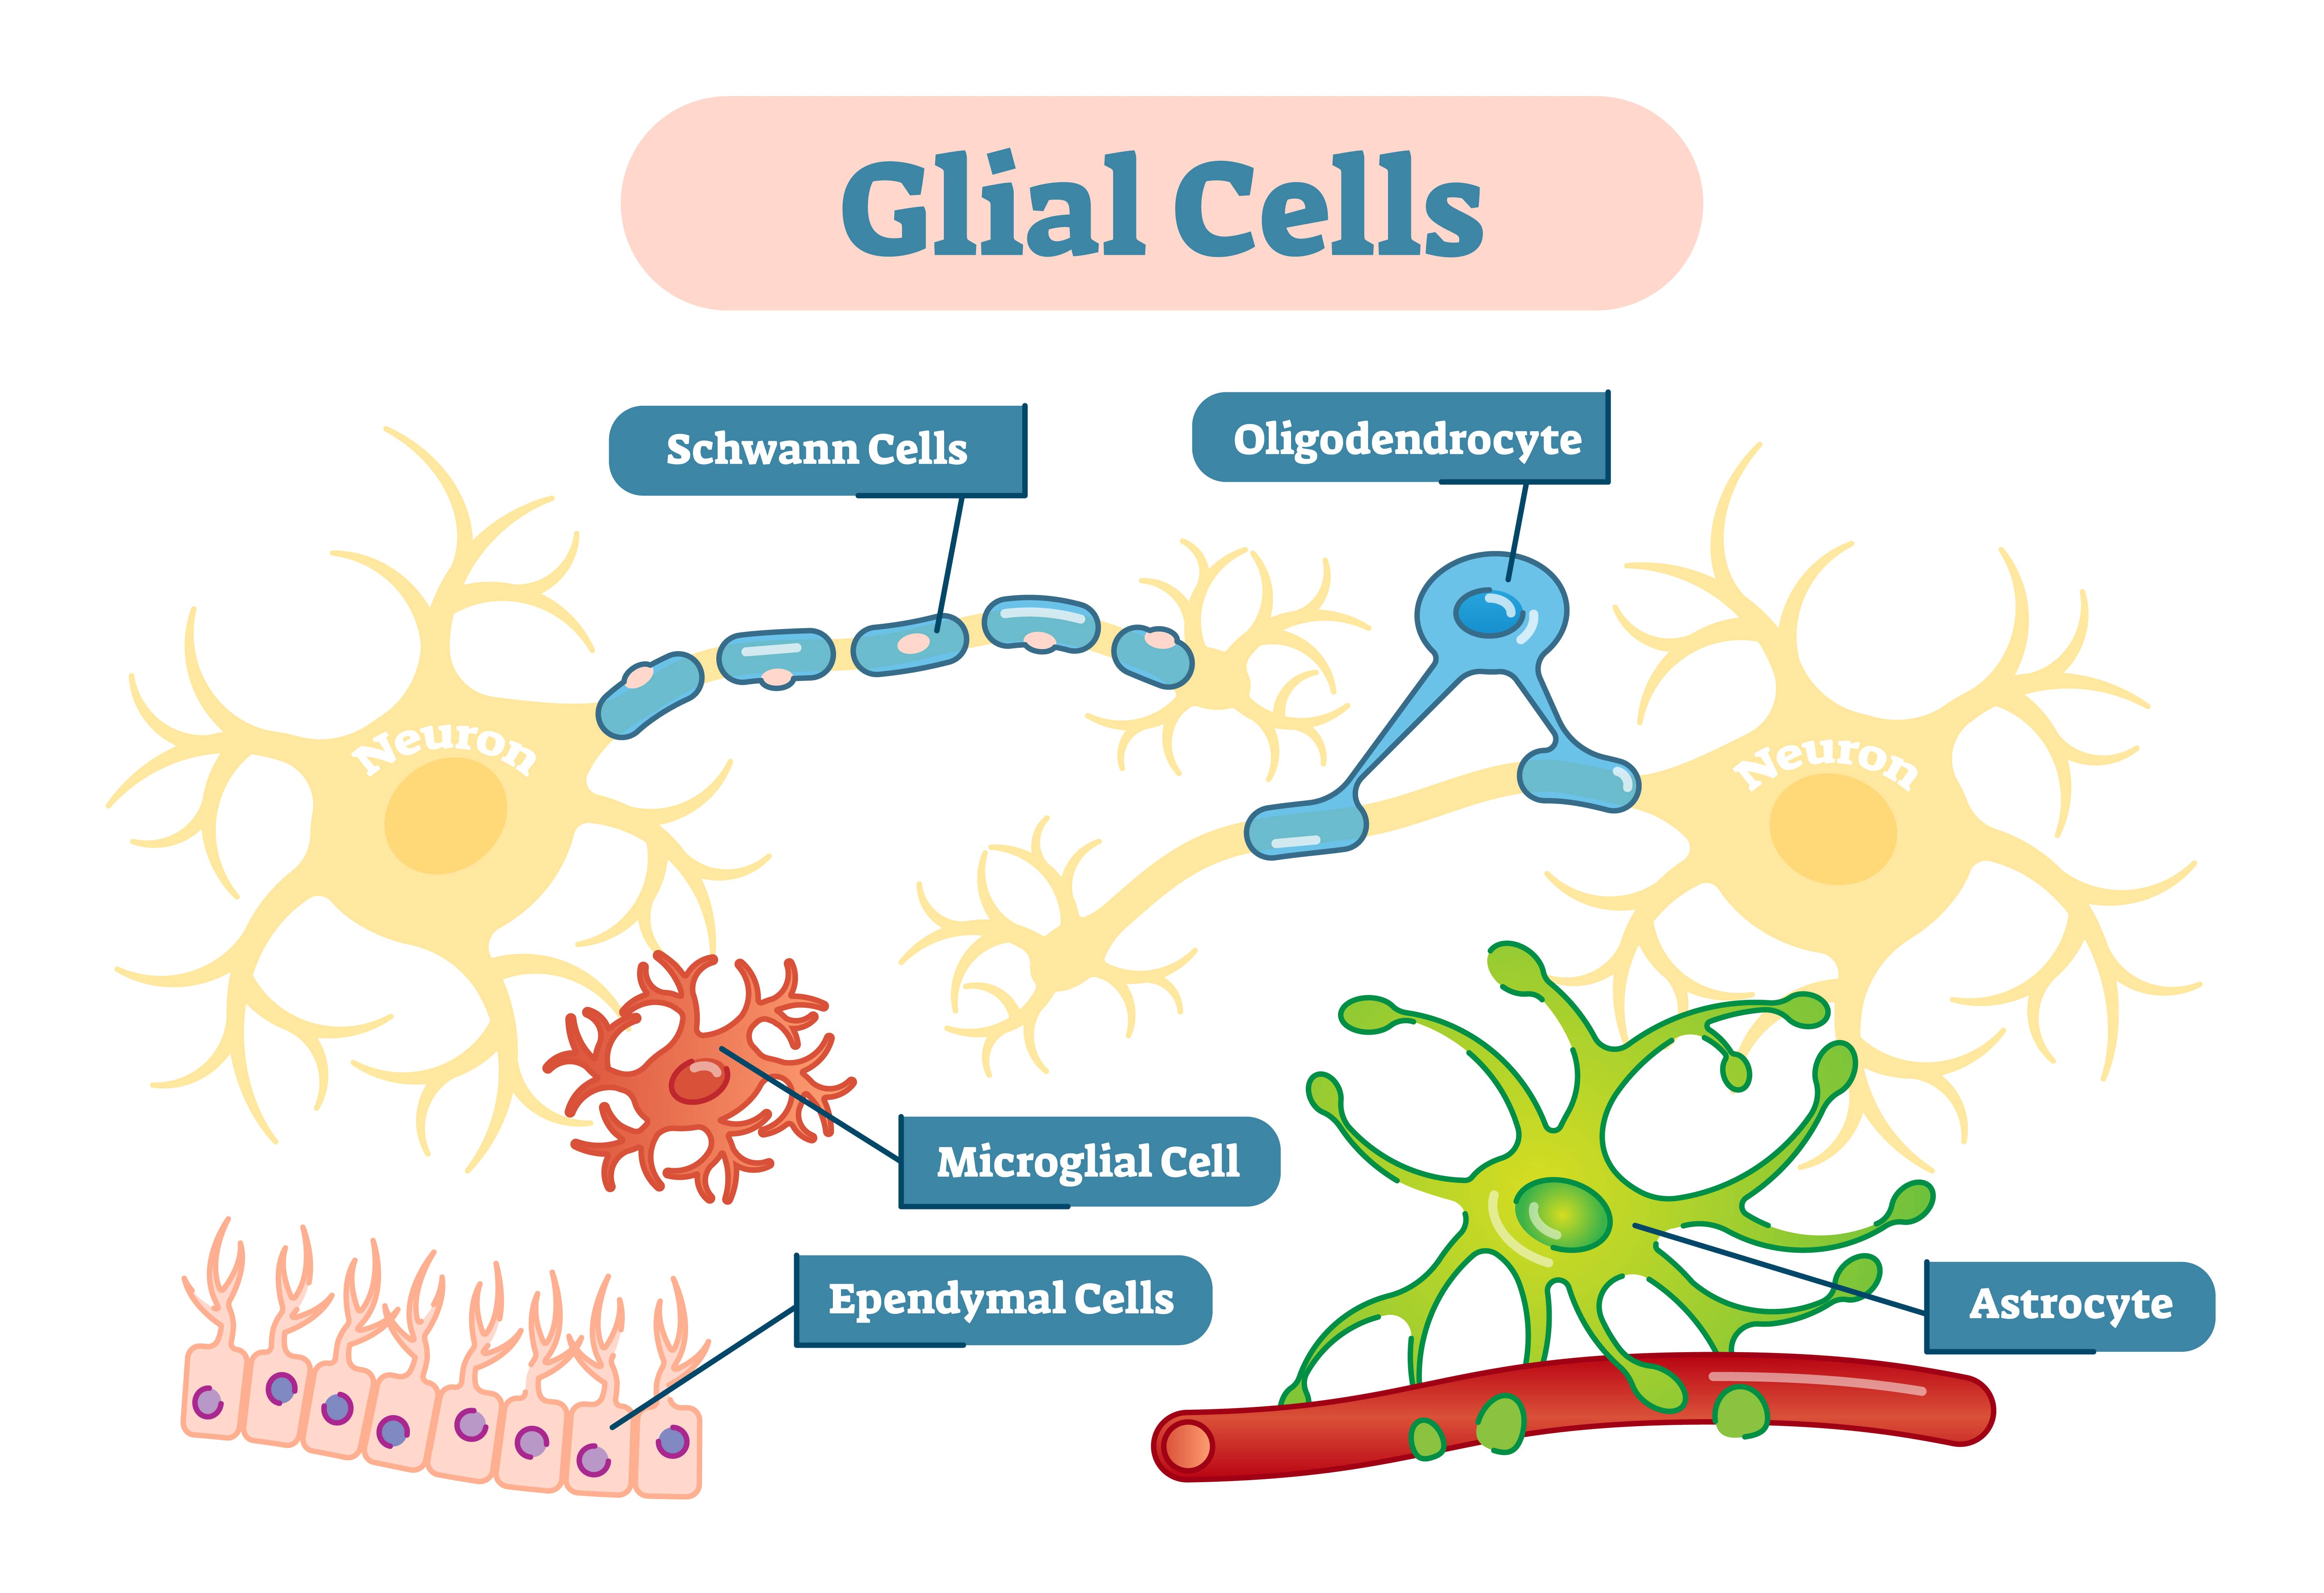 Glia Cells in the Central Nervous System: Astrocytes, Microglial, and Oligodendrocytes.